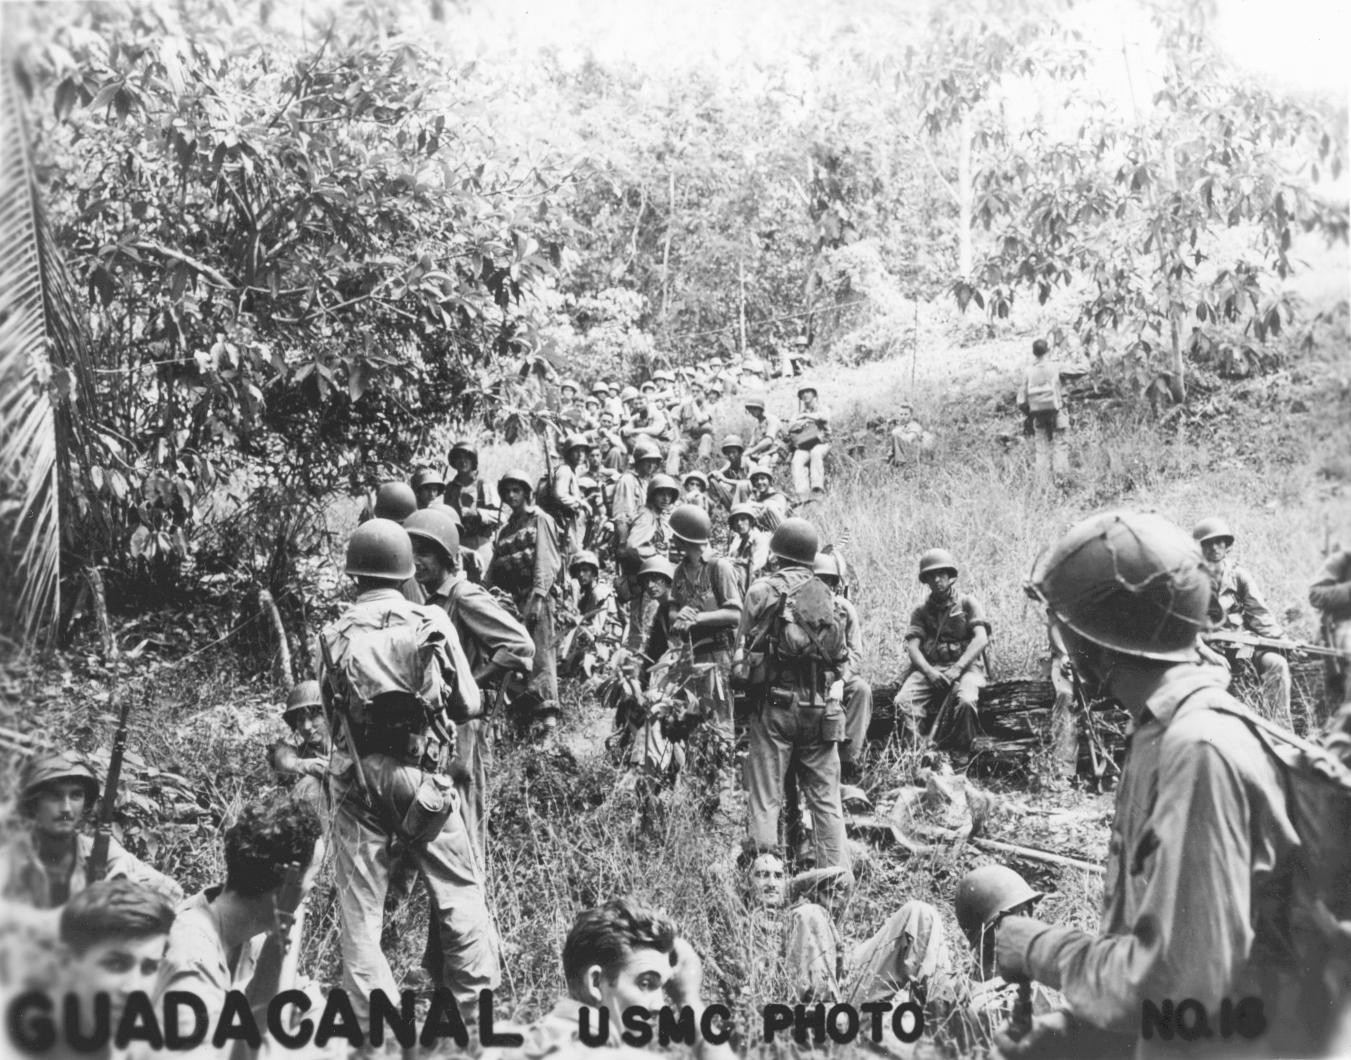 US Marines resting in the field on Guadalcanal, Solomon Islands, circa Aug-Dec 1942; note Springfield M1903 rifles and a Browning Automatic Rifle gunner on far right